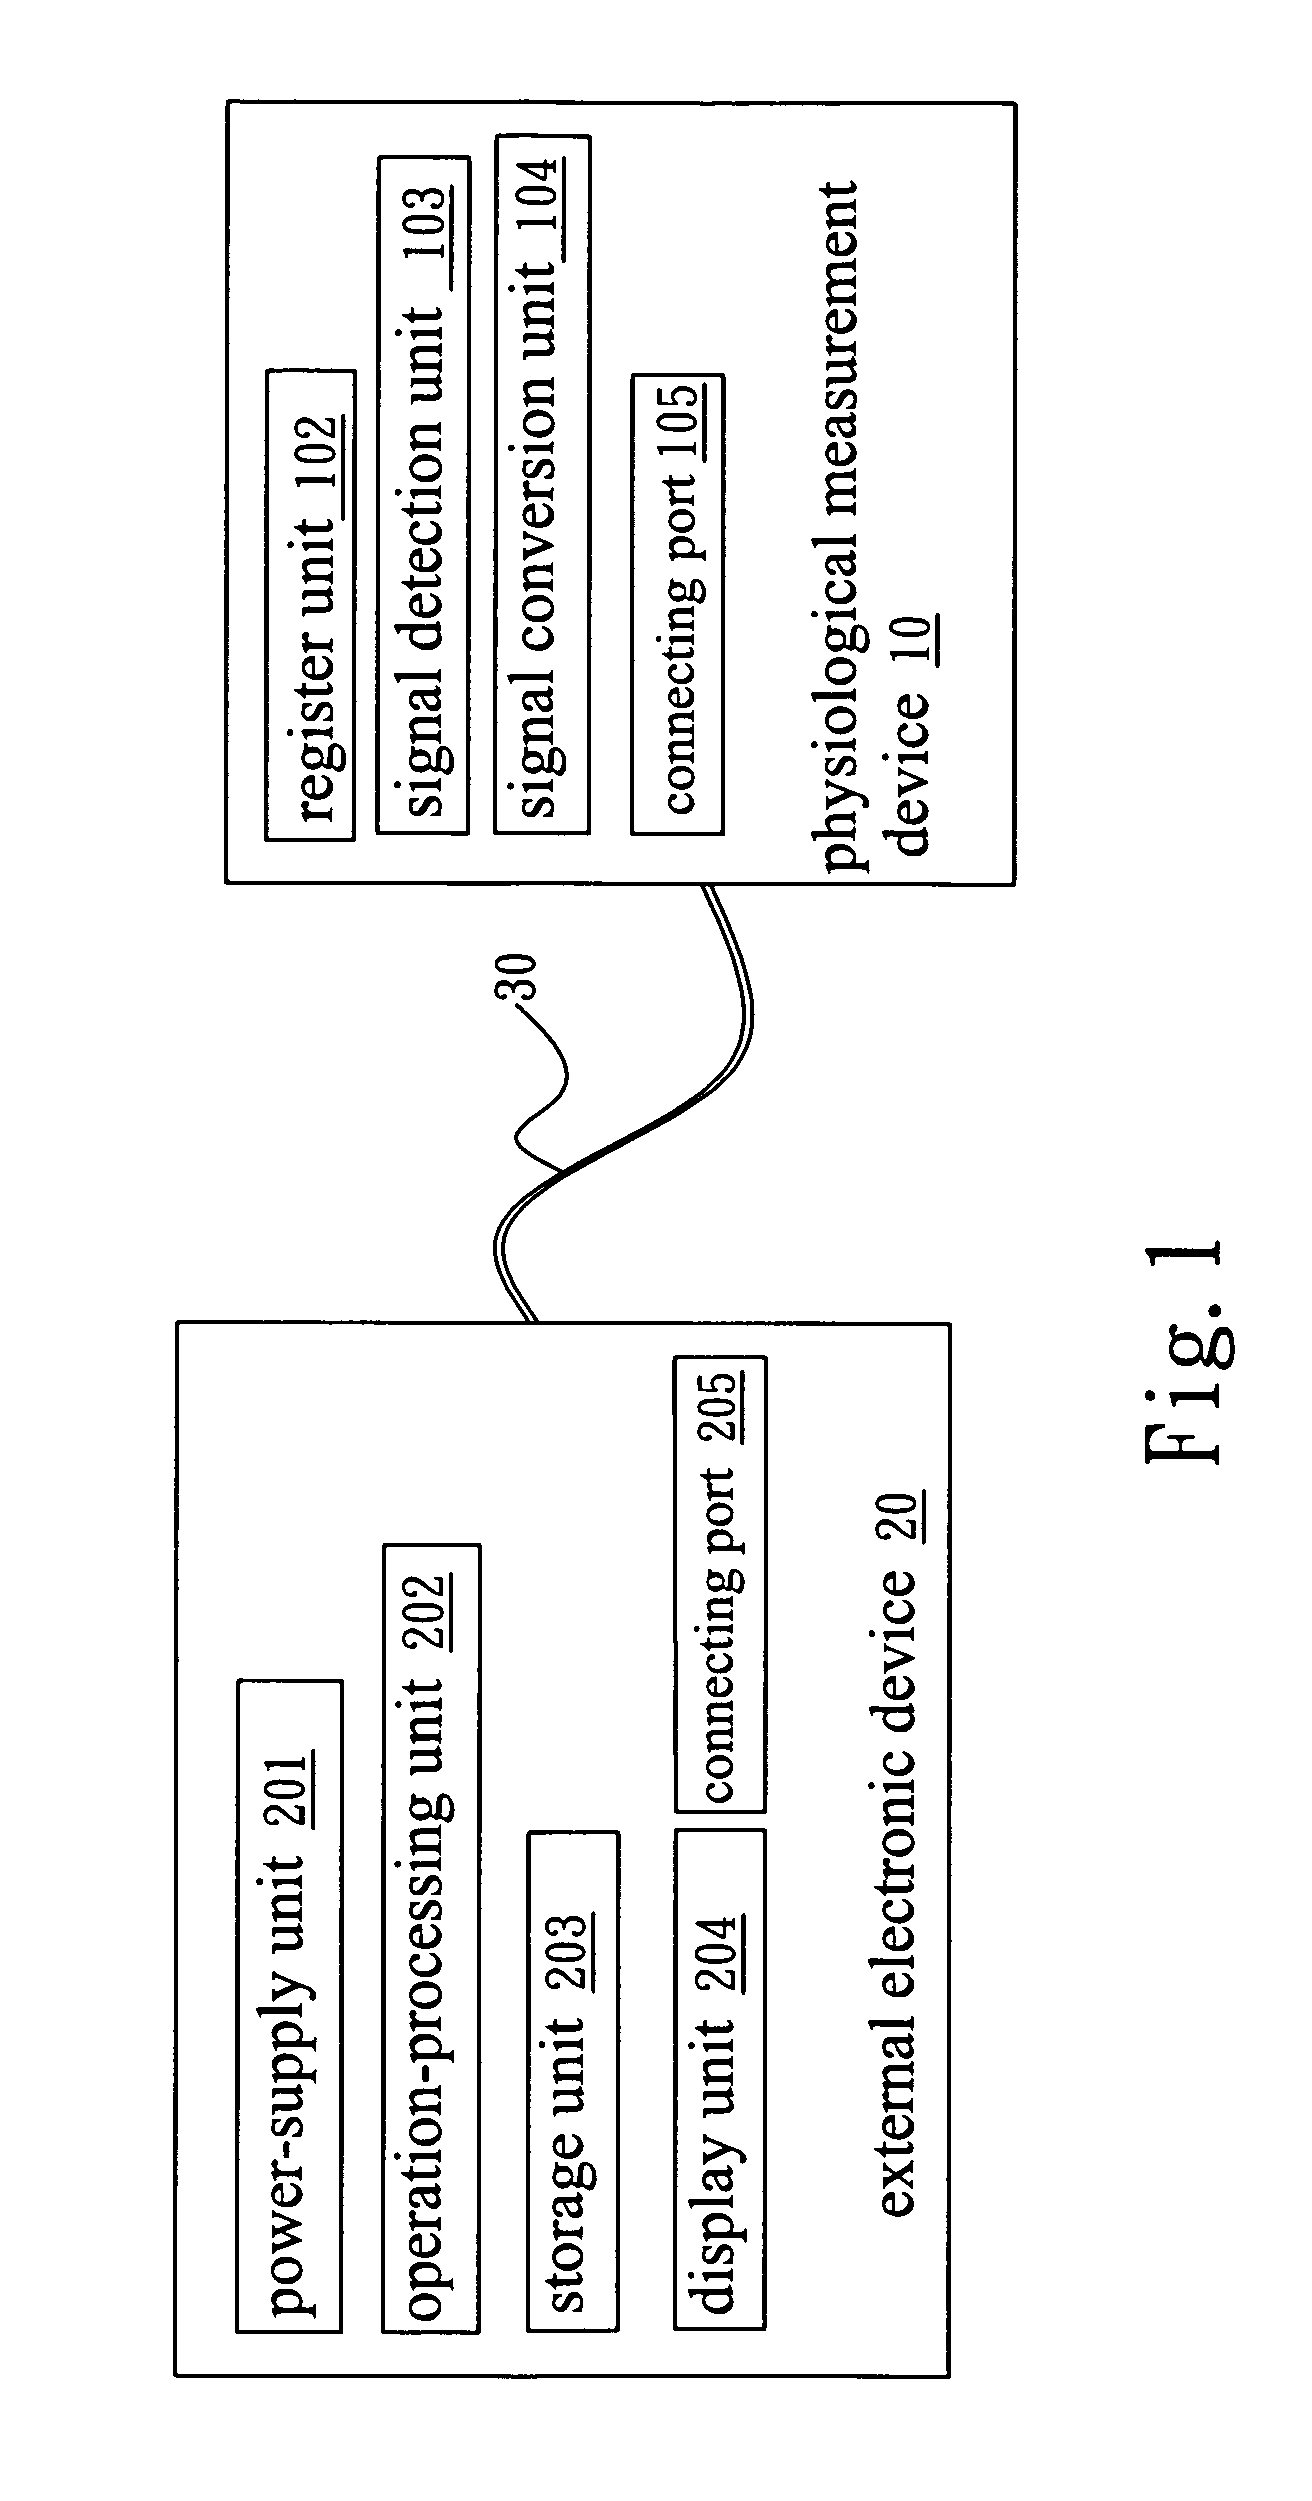 Simplified physiological measurement device